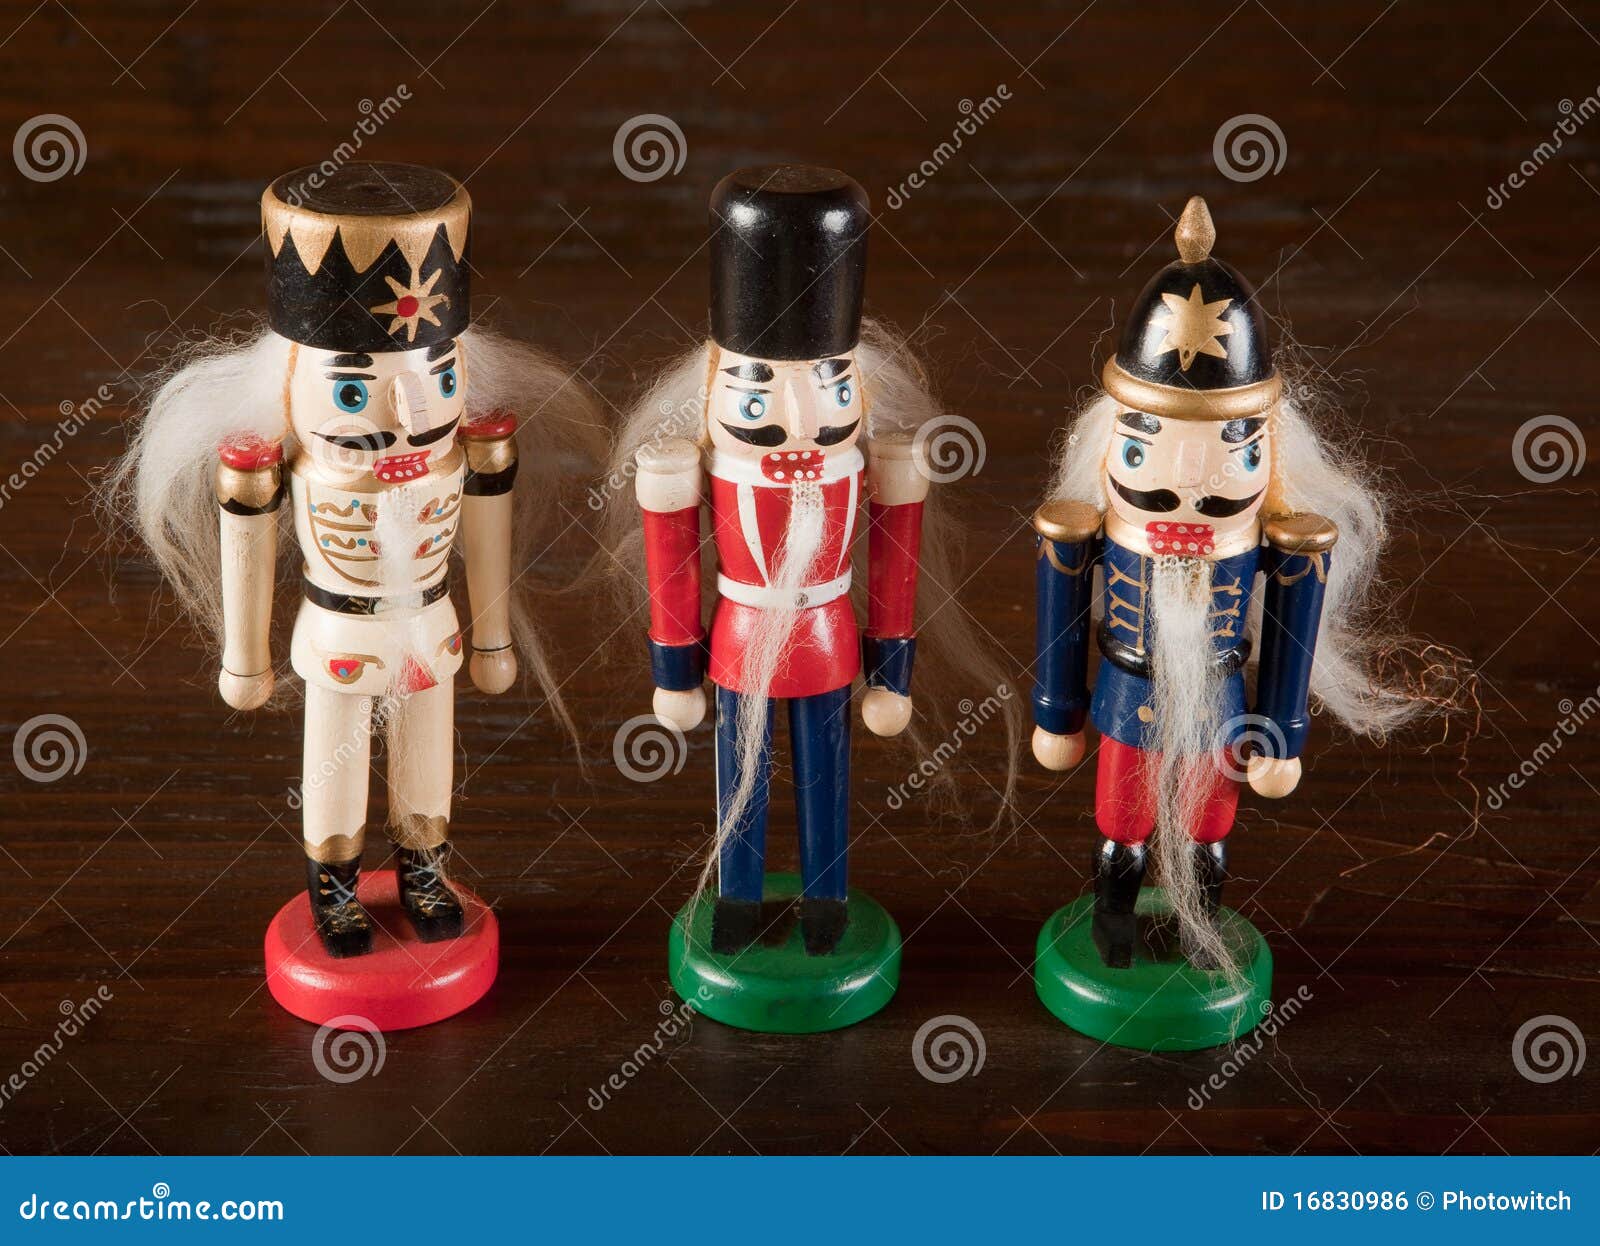 Looking For Wooden Nutcracker Plans